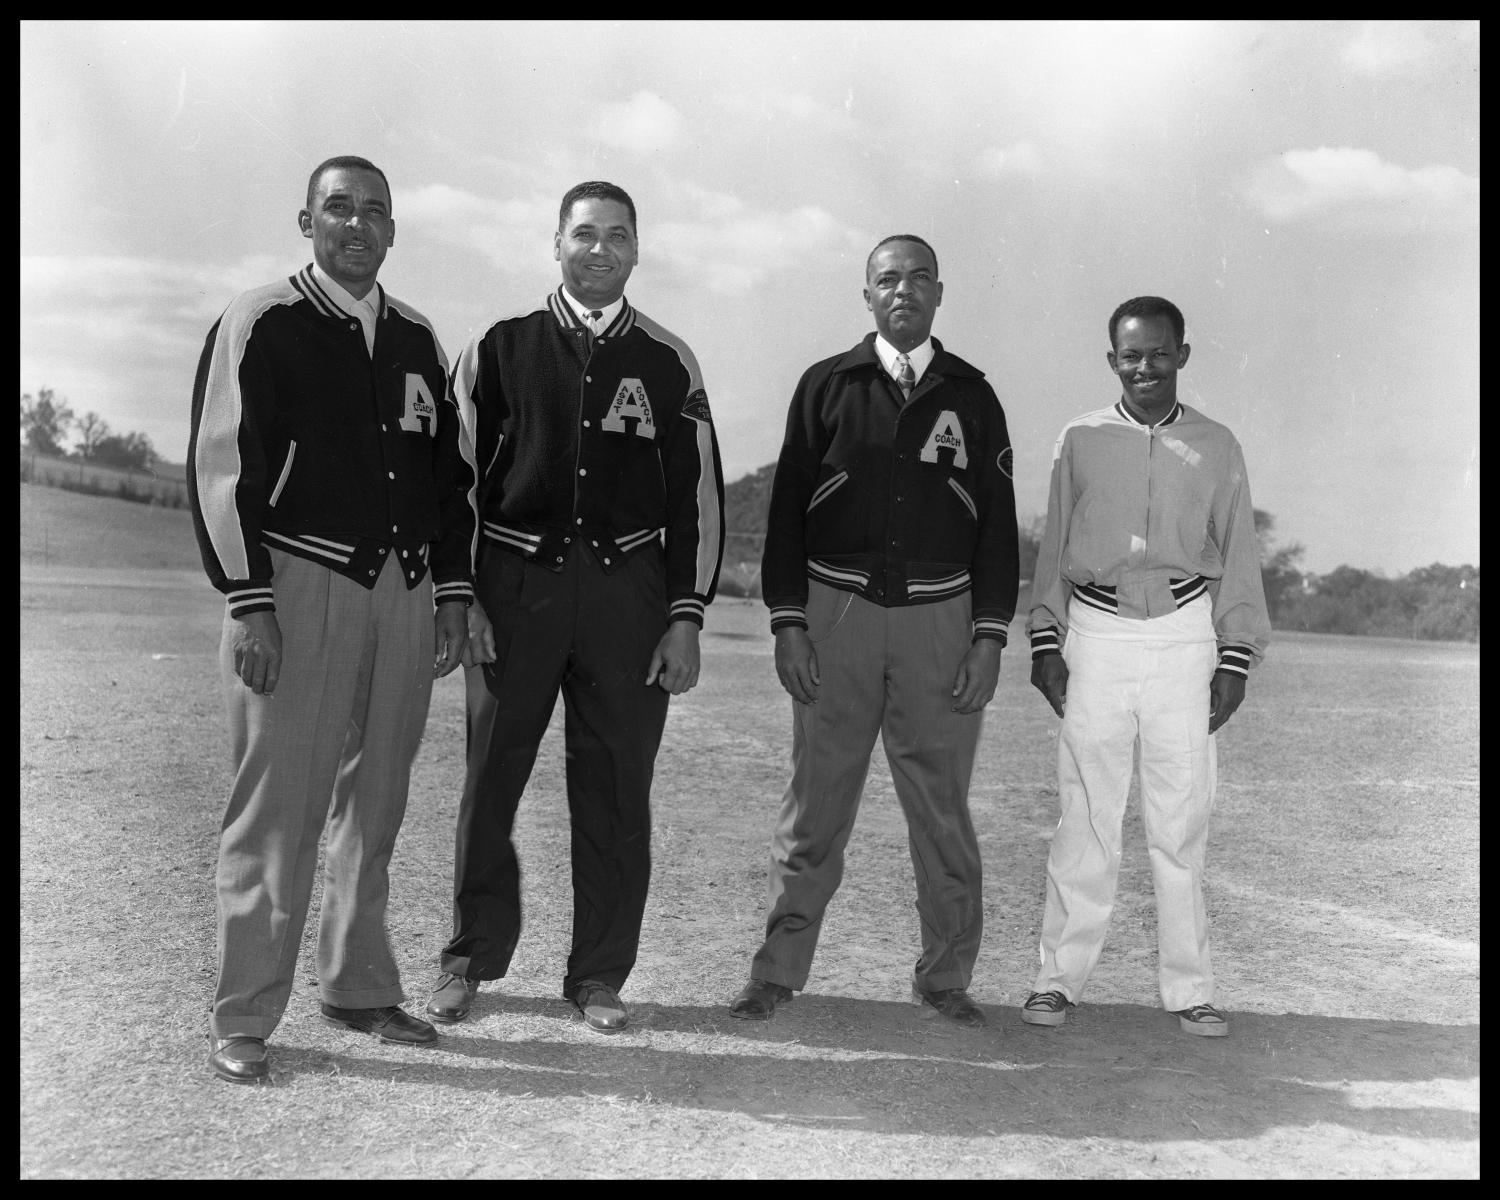 Four Coaches in Letterman's Jackets]